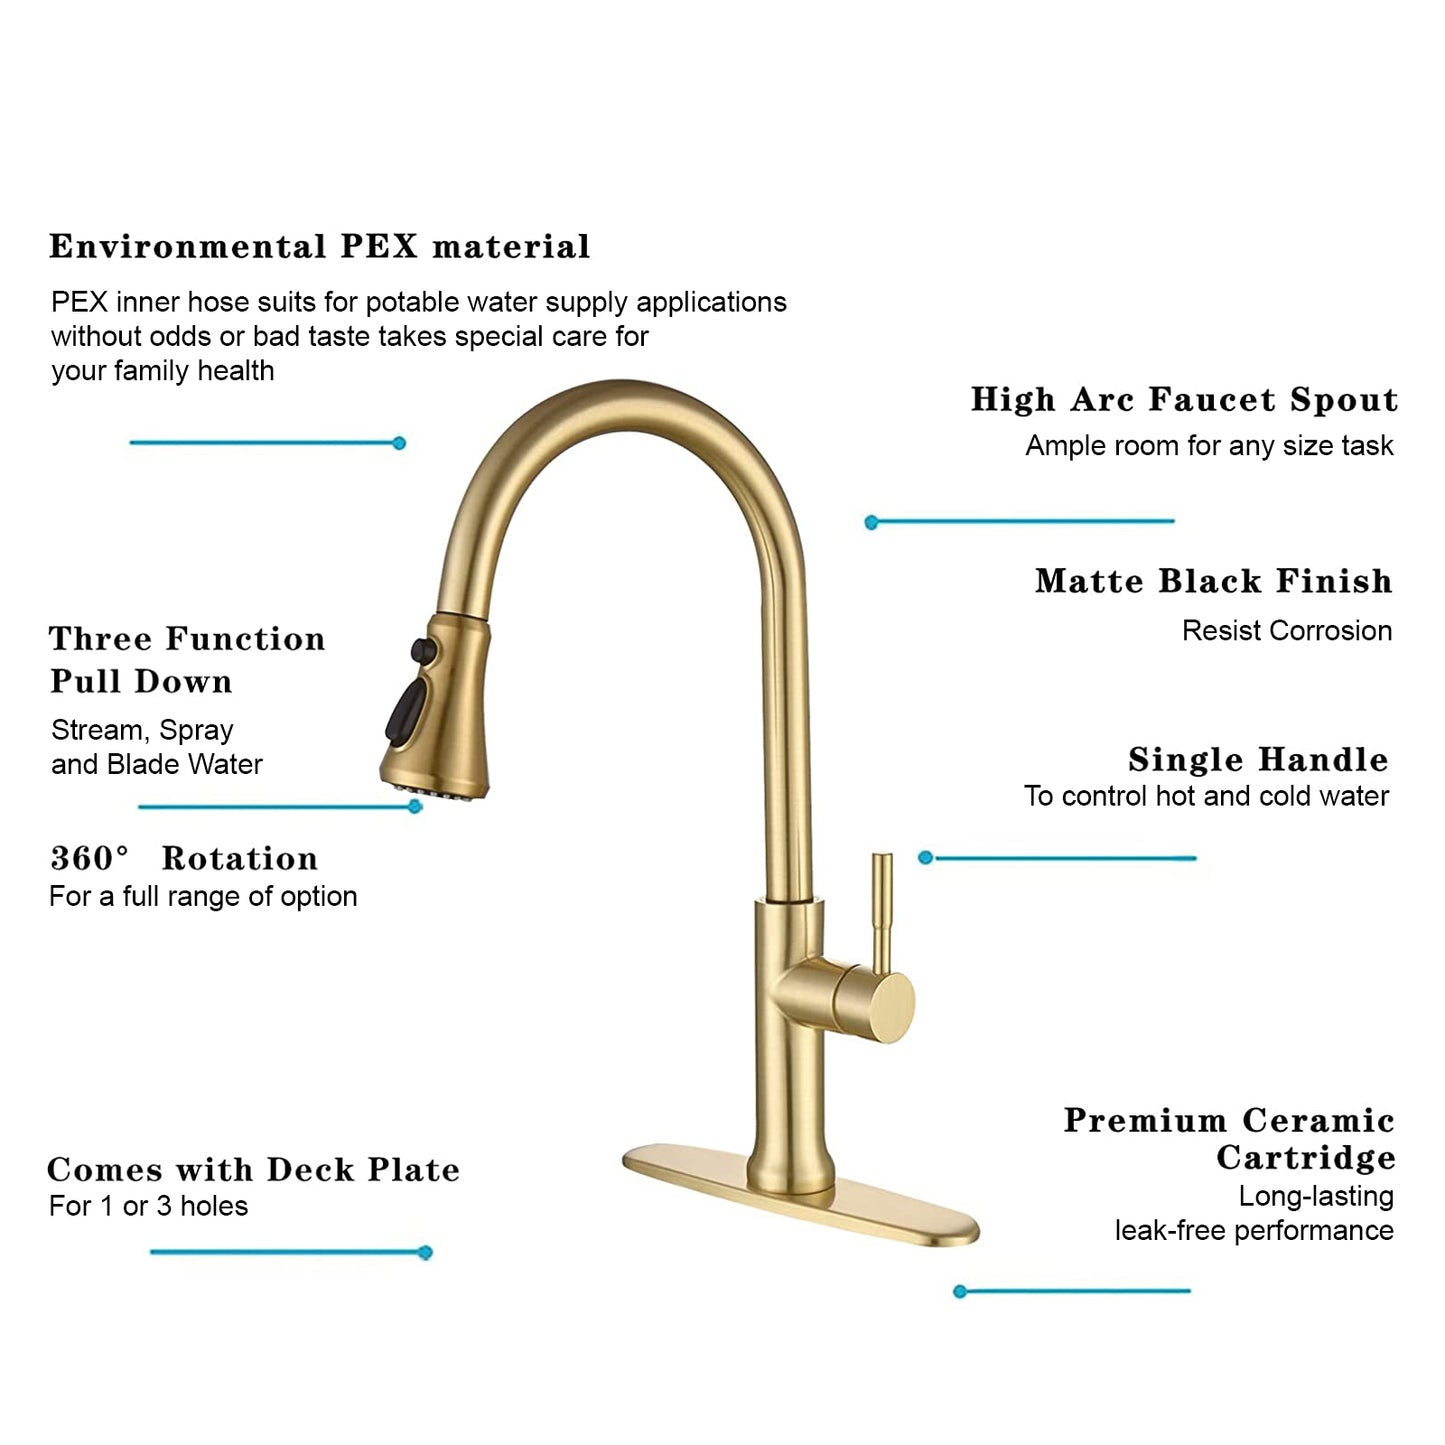 Stainless Steel Kitchen Faucet 360 Flexible Pull Out Hose Dual Spray Gold Tap Mixer Model KPY-30215